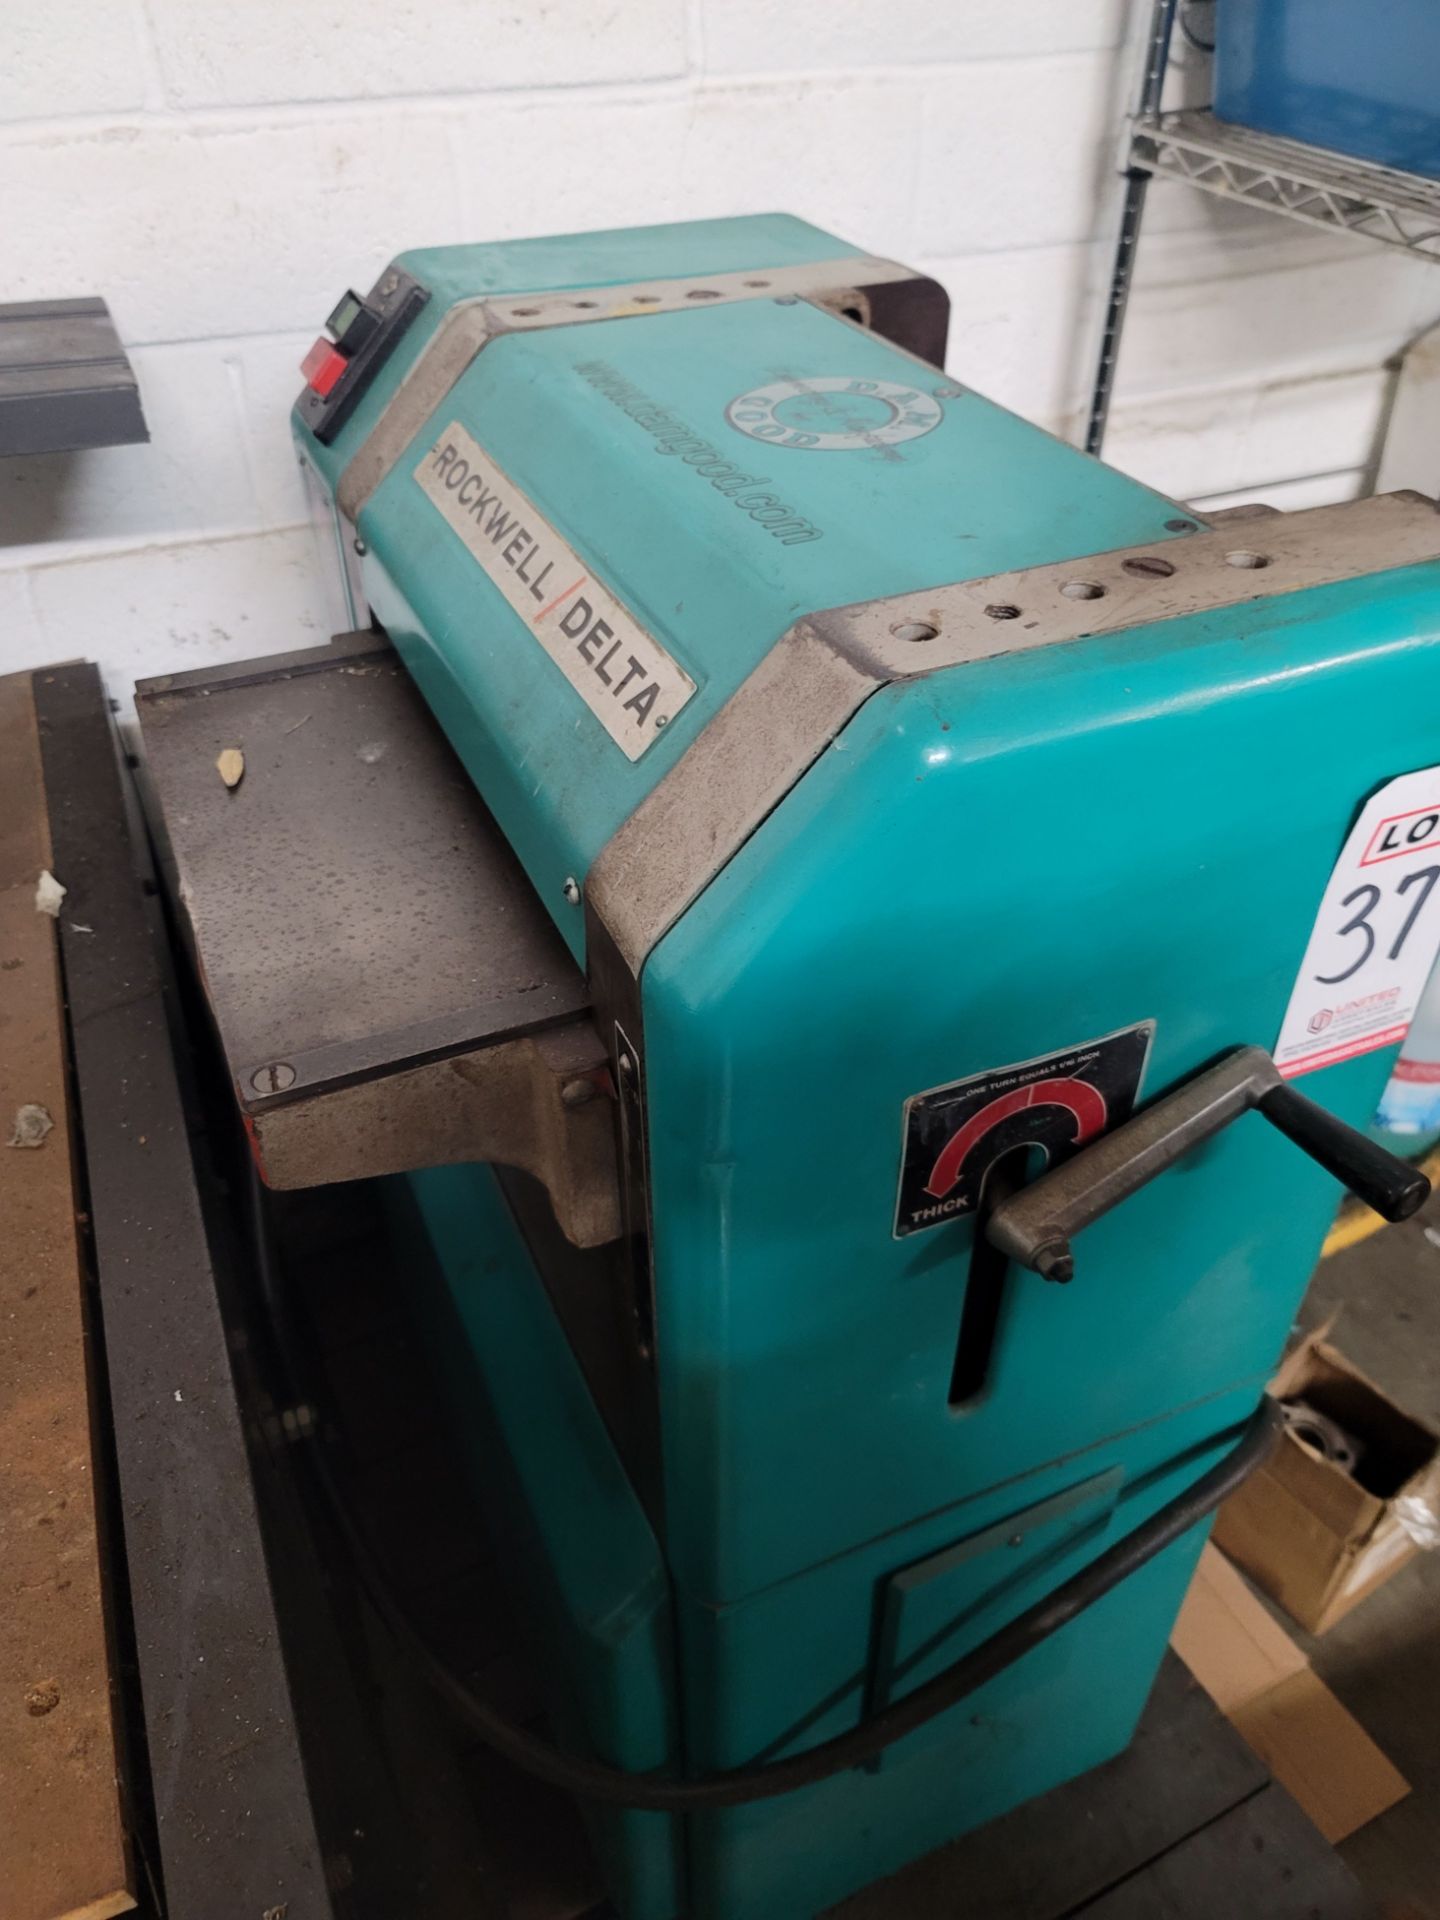 ROCKWELL/DELTA 13" X 6" THICKNESS PLANER, SERIES 221-401, S/N ET-1706 - Image 2 of 2